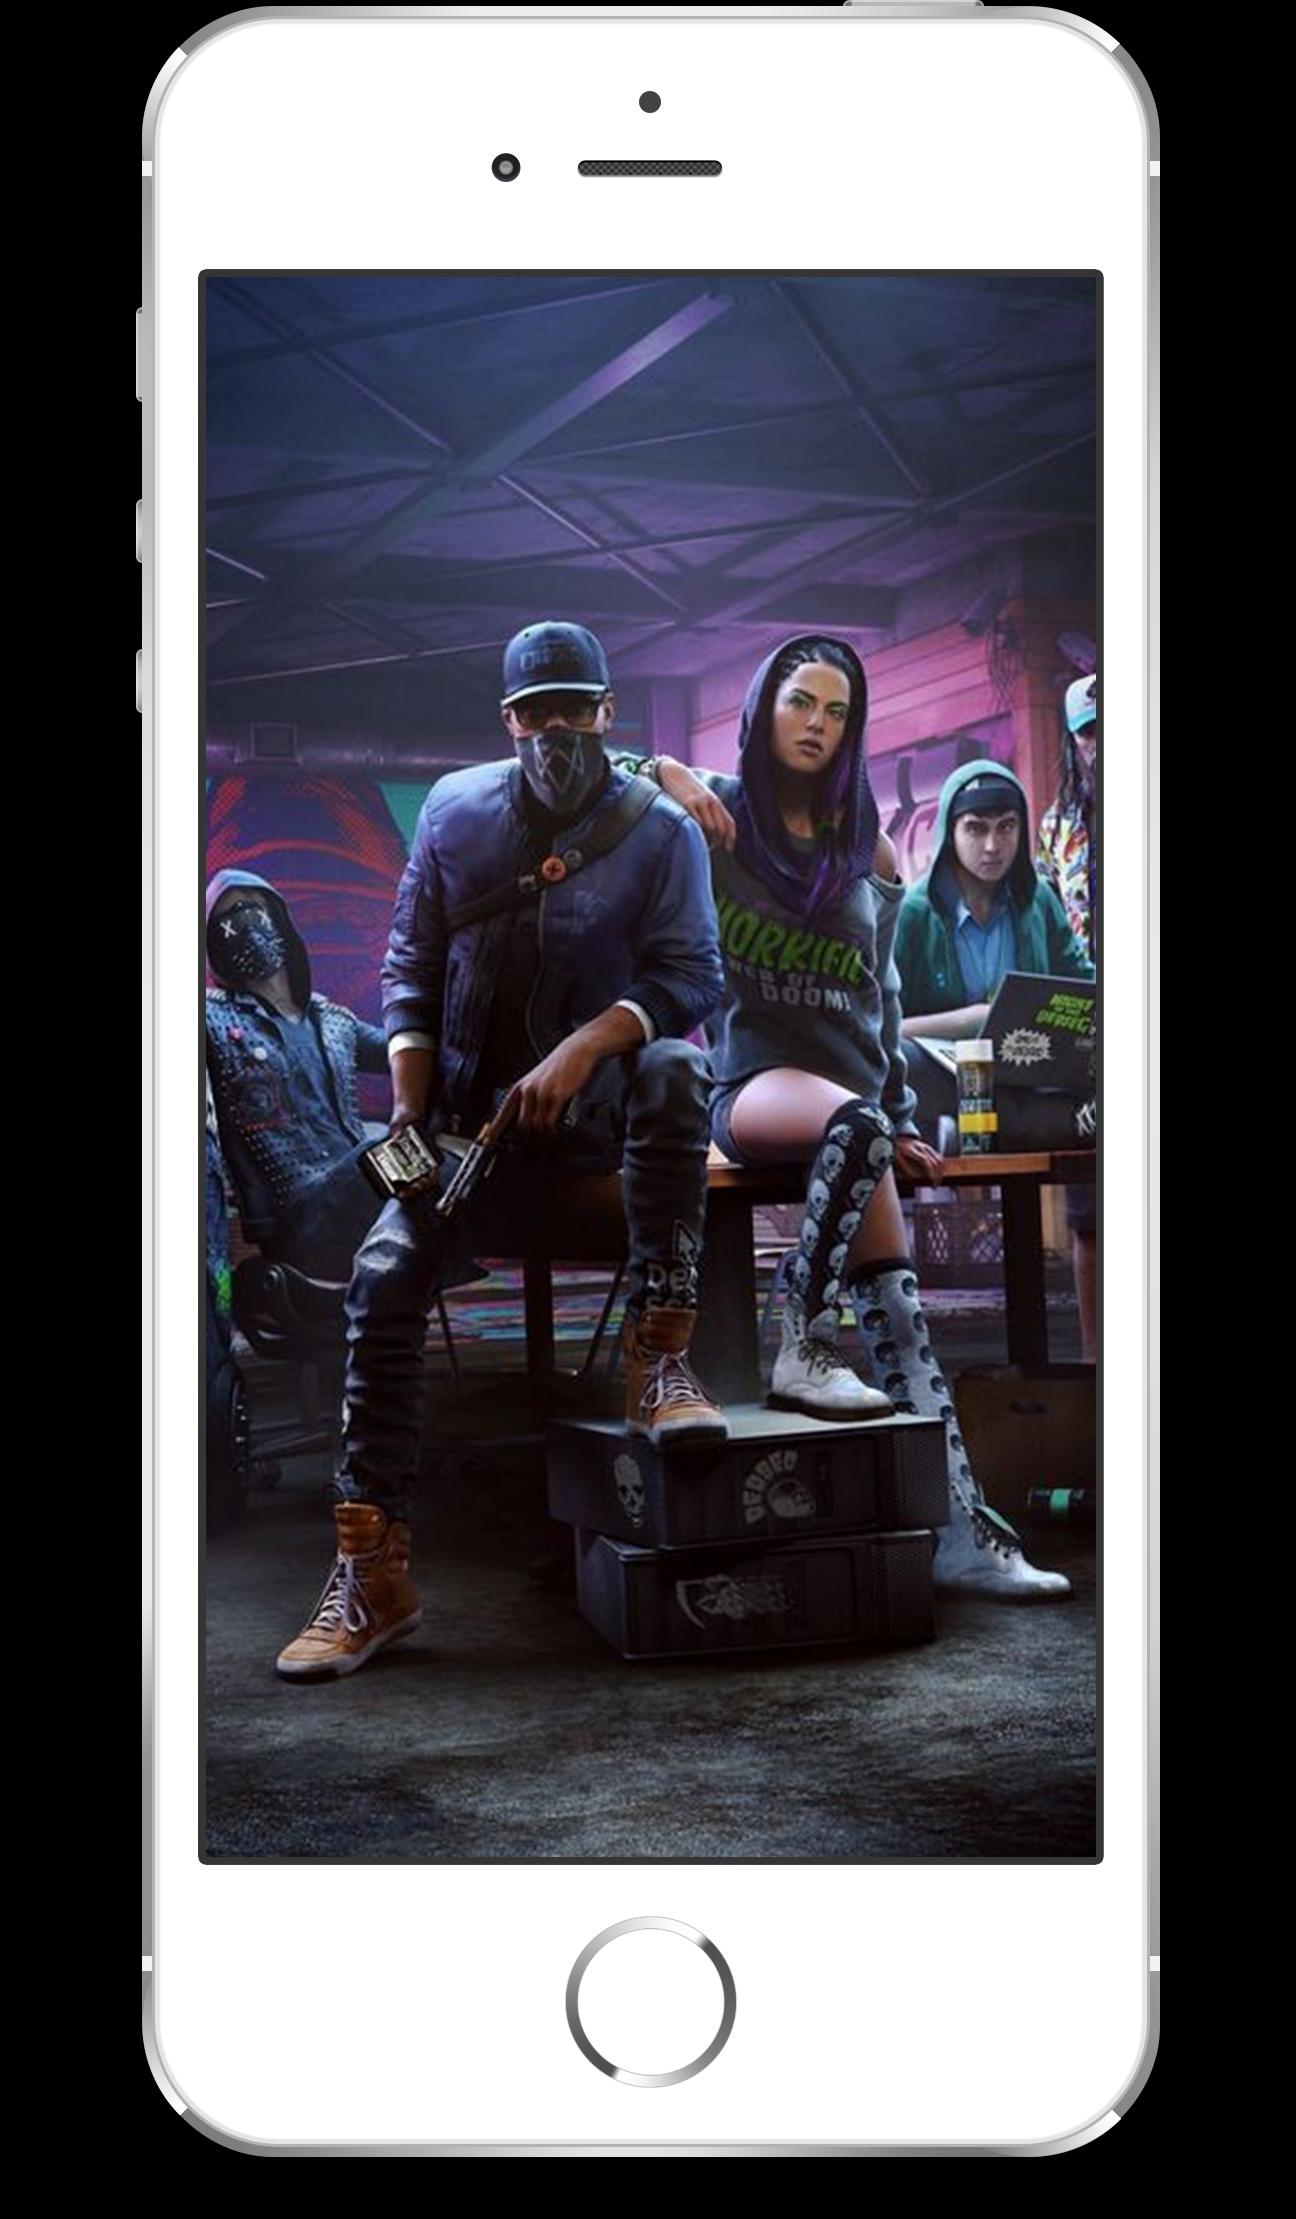 Watch Dogs 2 Wallpapers Hd For Android Apk Download